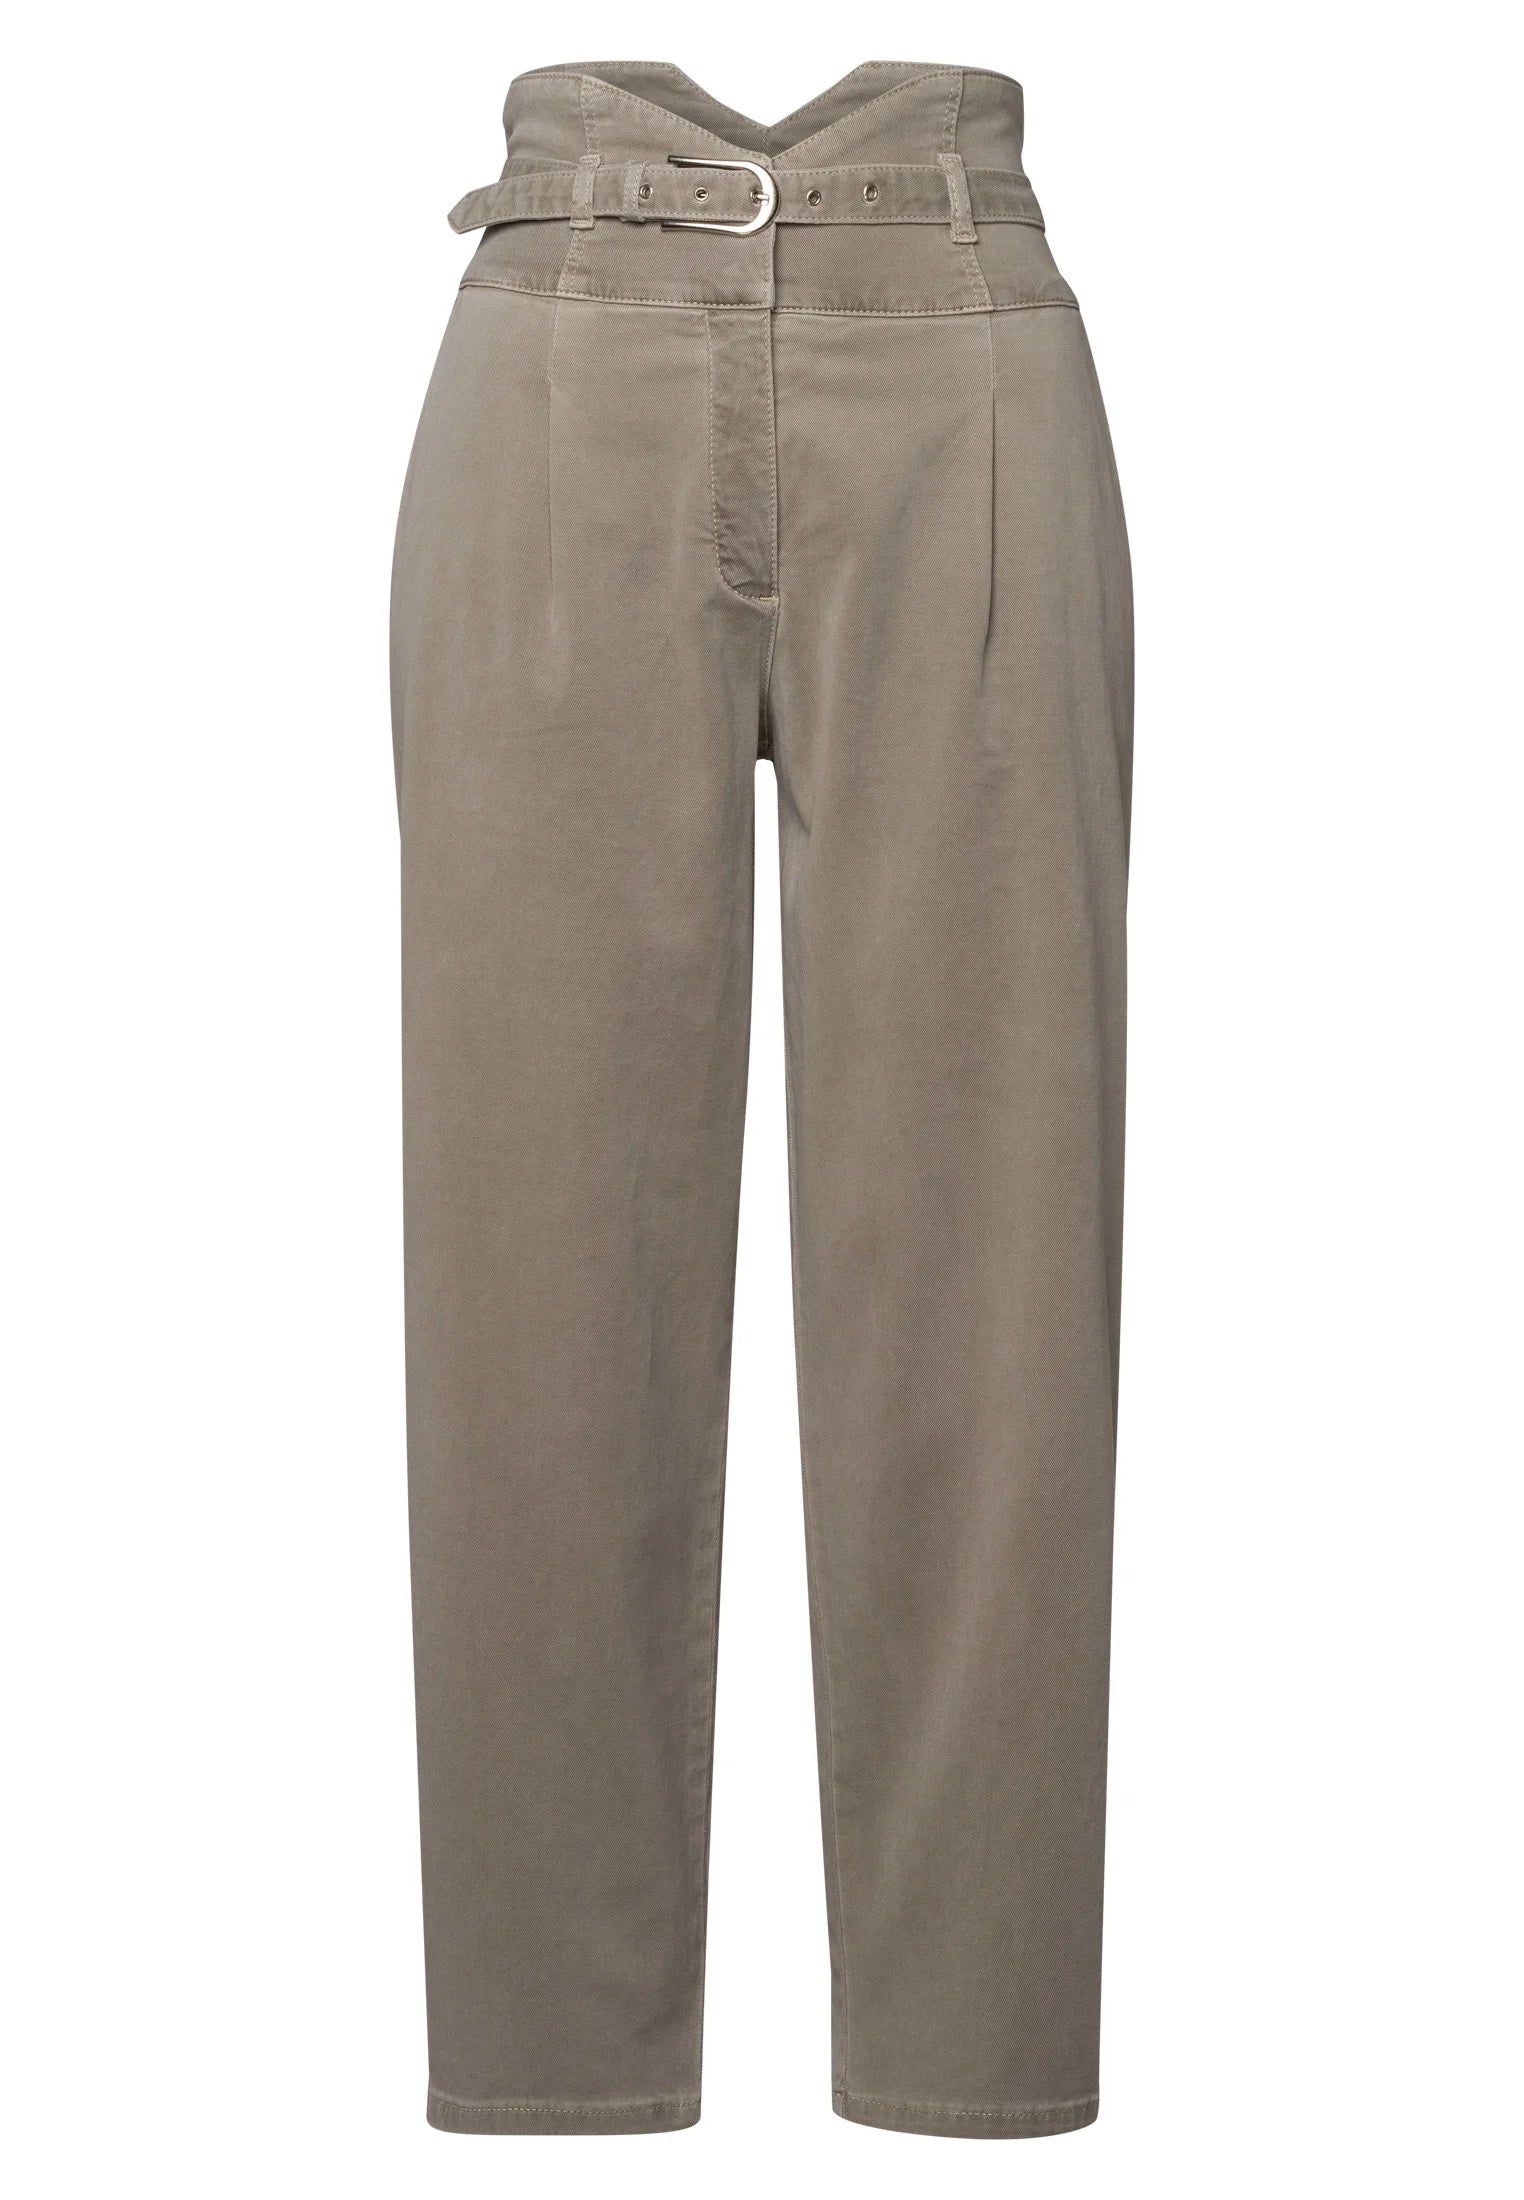 MARC AUREL PLEATED TROUSERS FROM SUSTAINABLE ECO FRIENDLY LINE